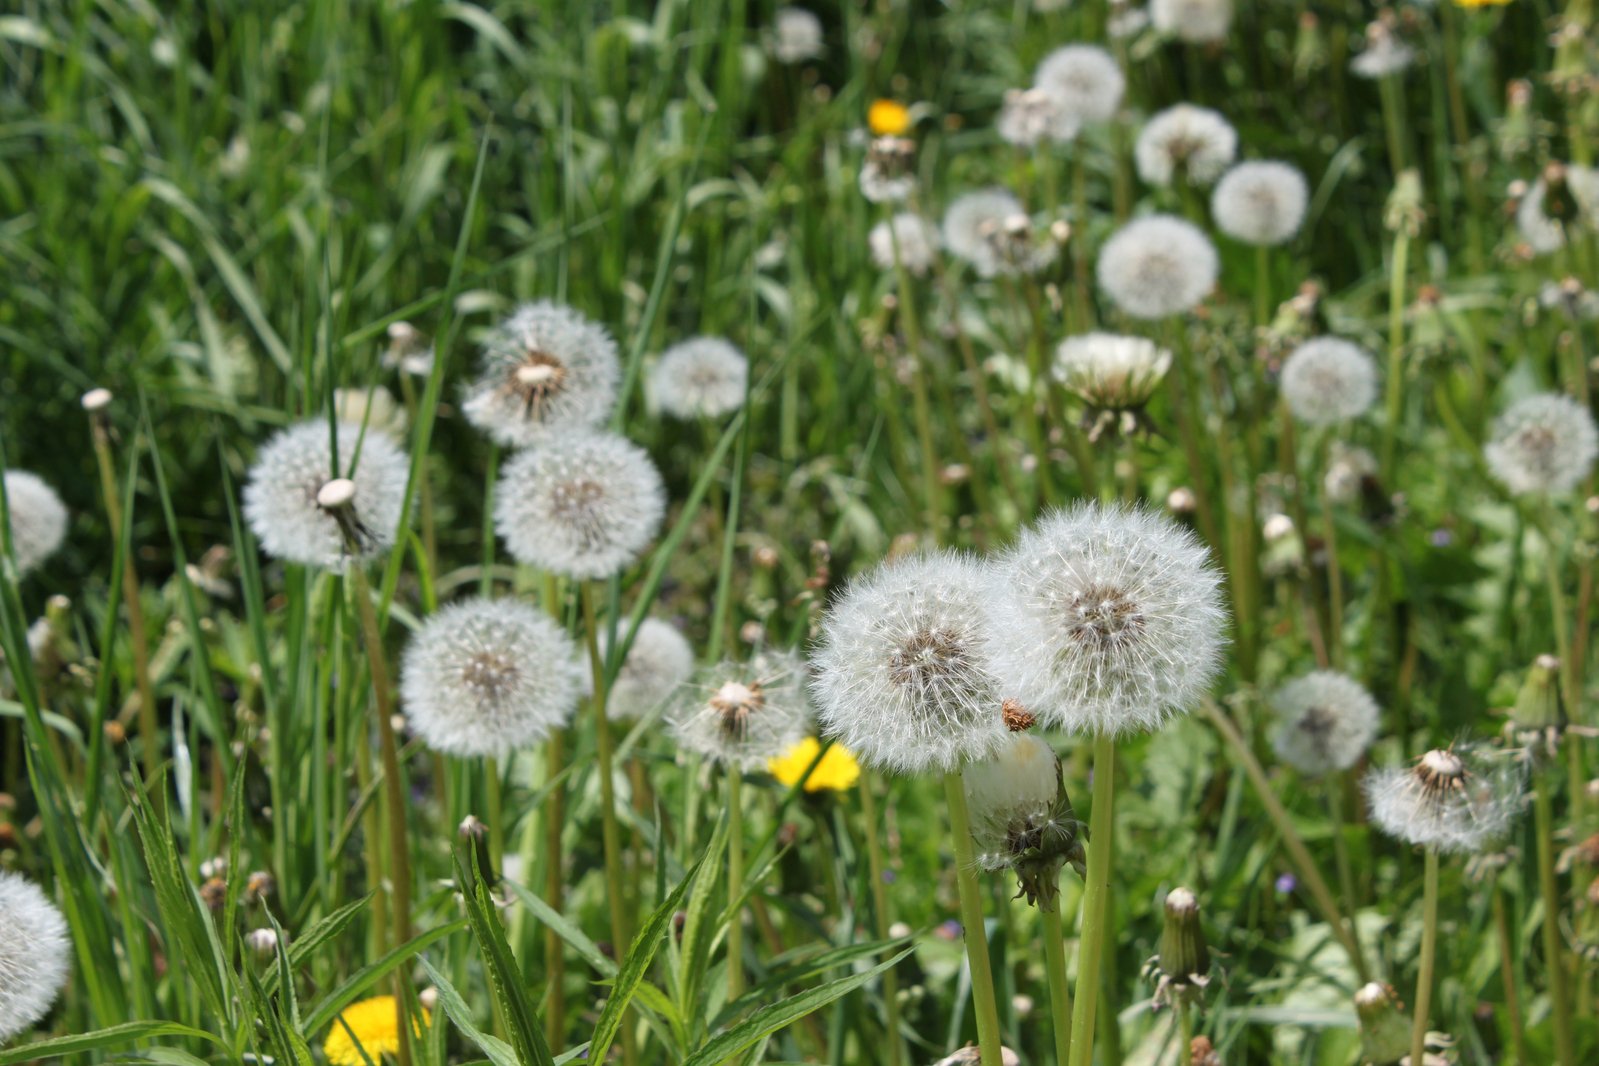 a group of dandelions with small yellow flowers